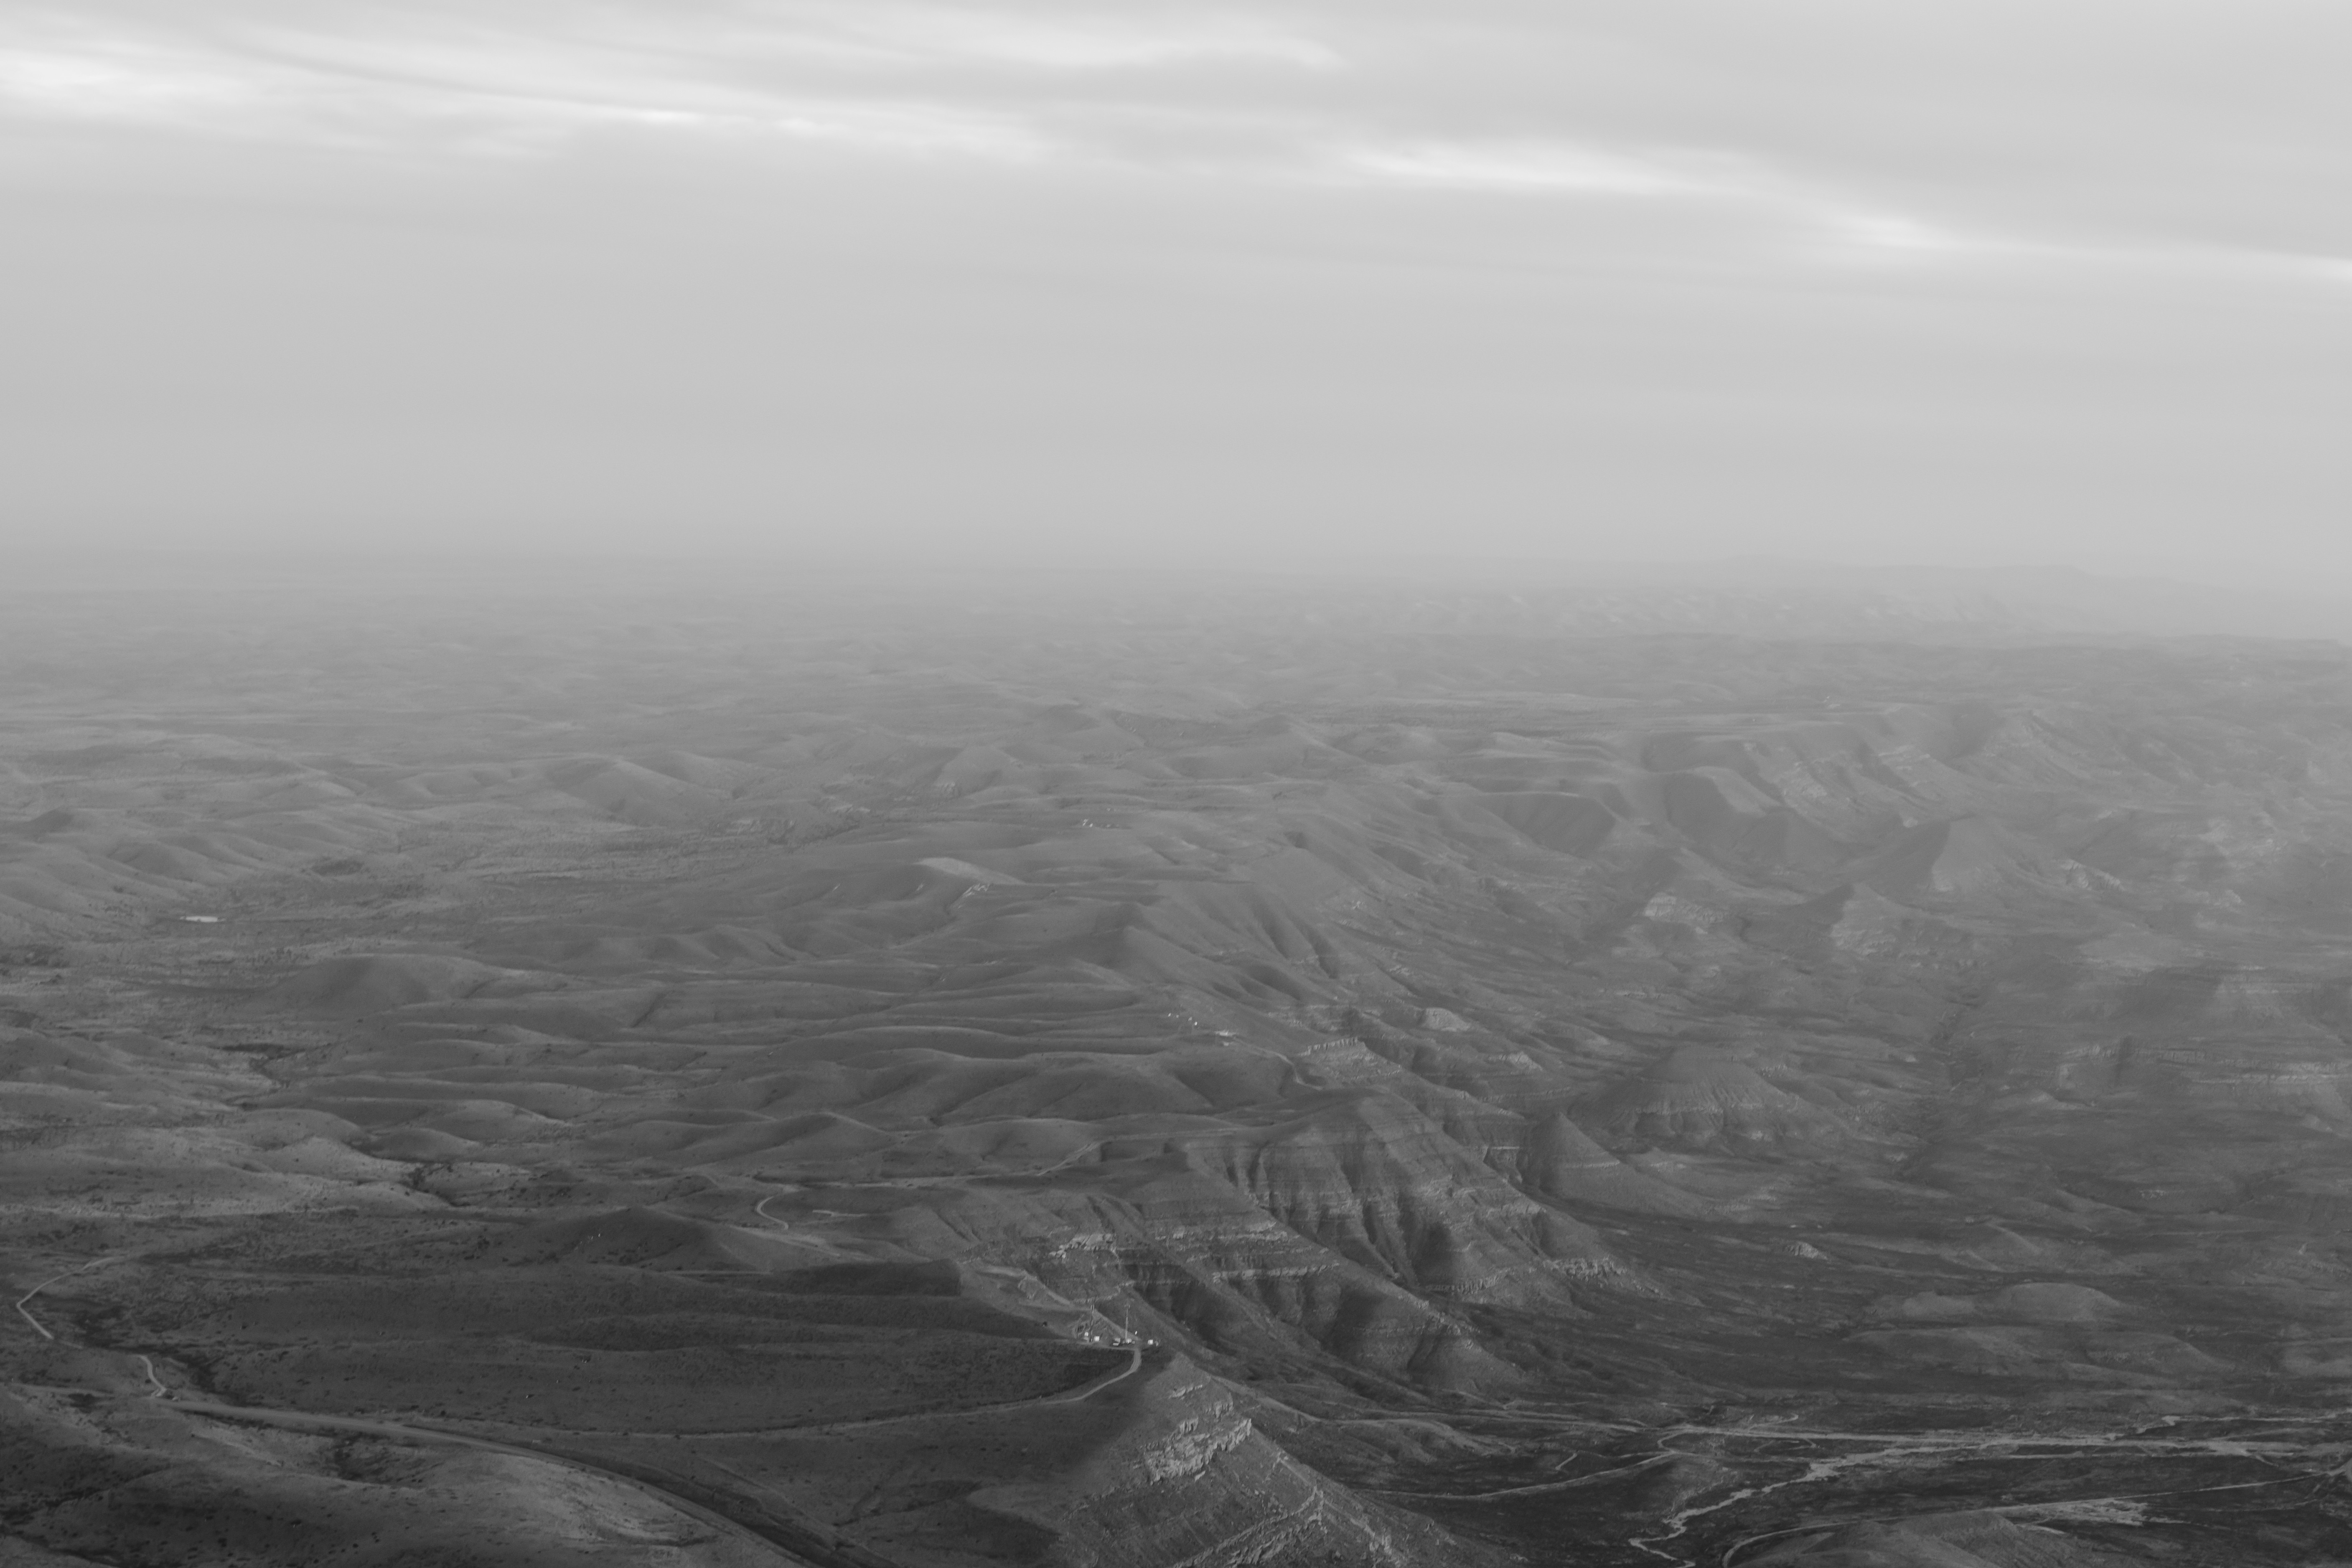 greyscale photo of land formation